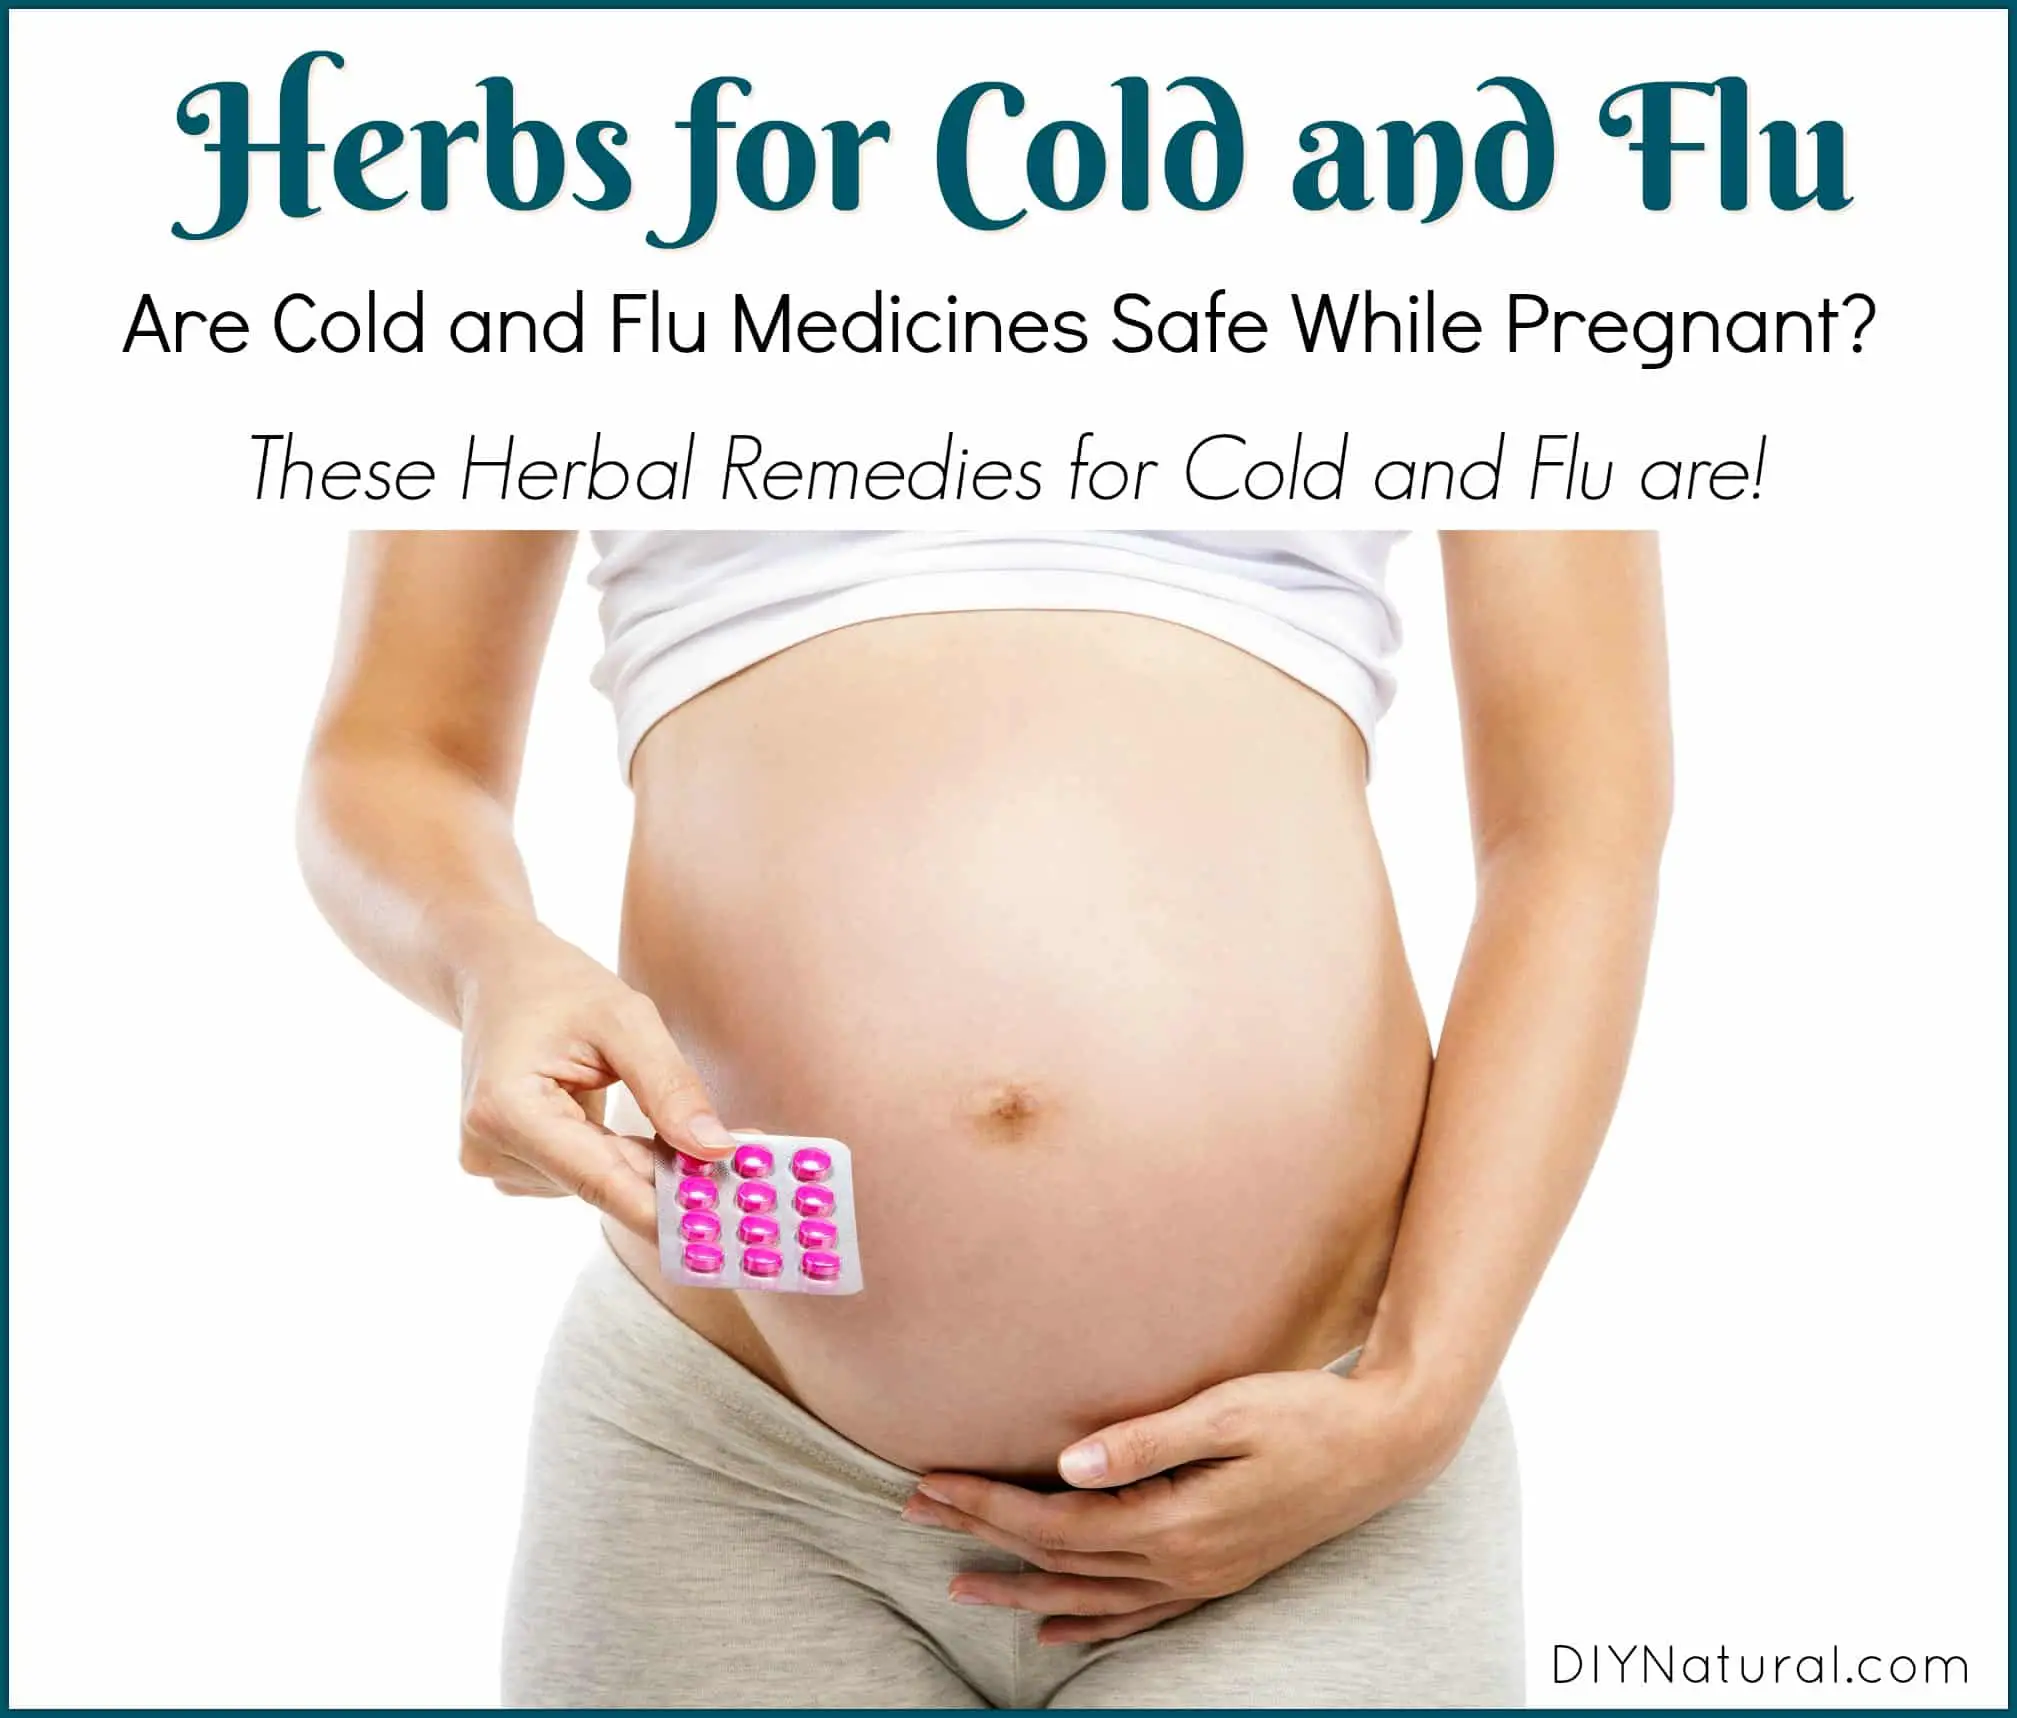 Cold Medicine While Pregnant? Try These Safe Cold &  Flu Herbs Instead